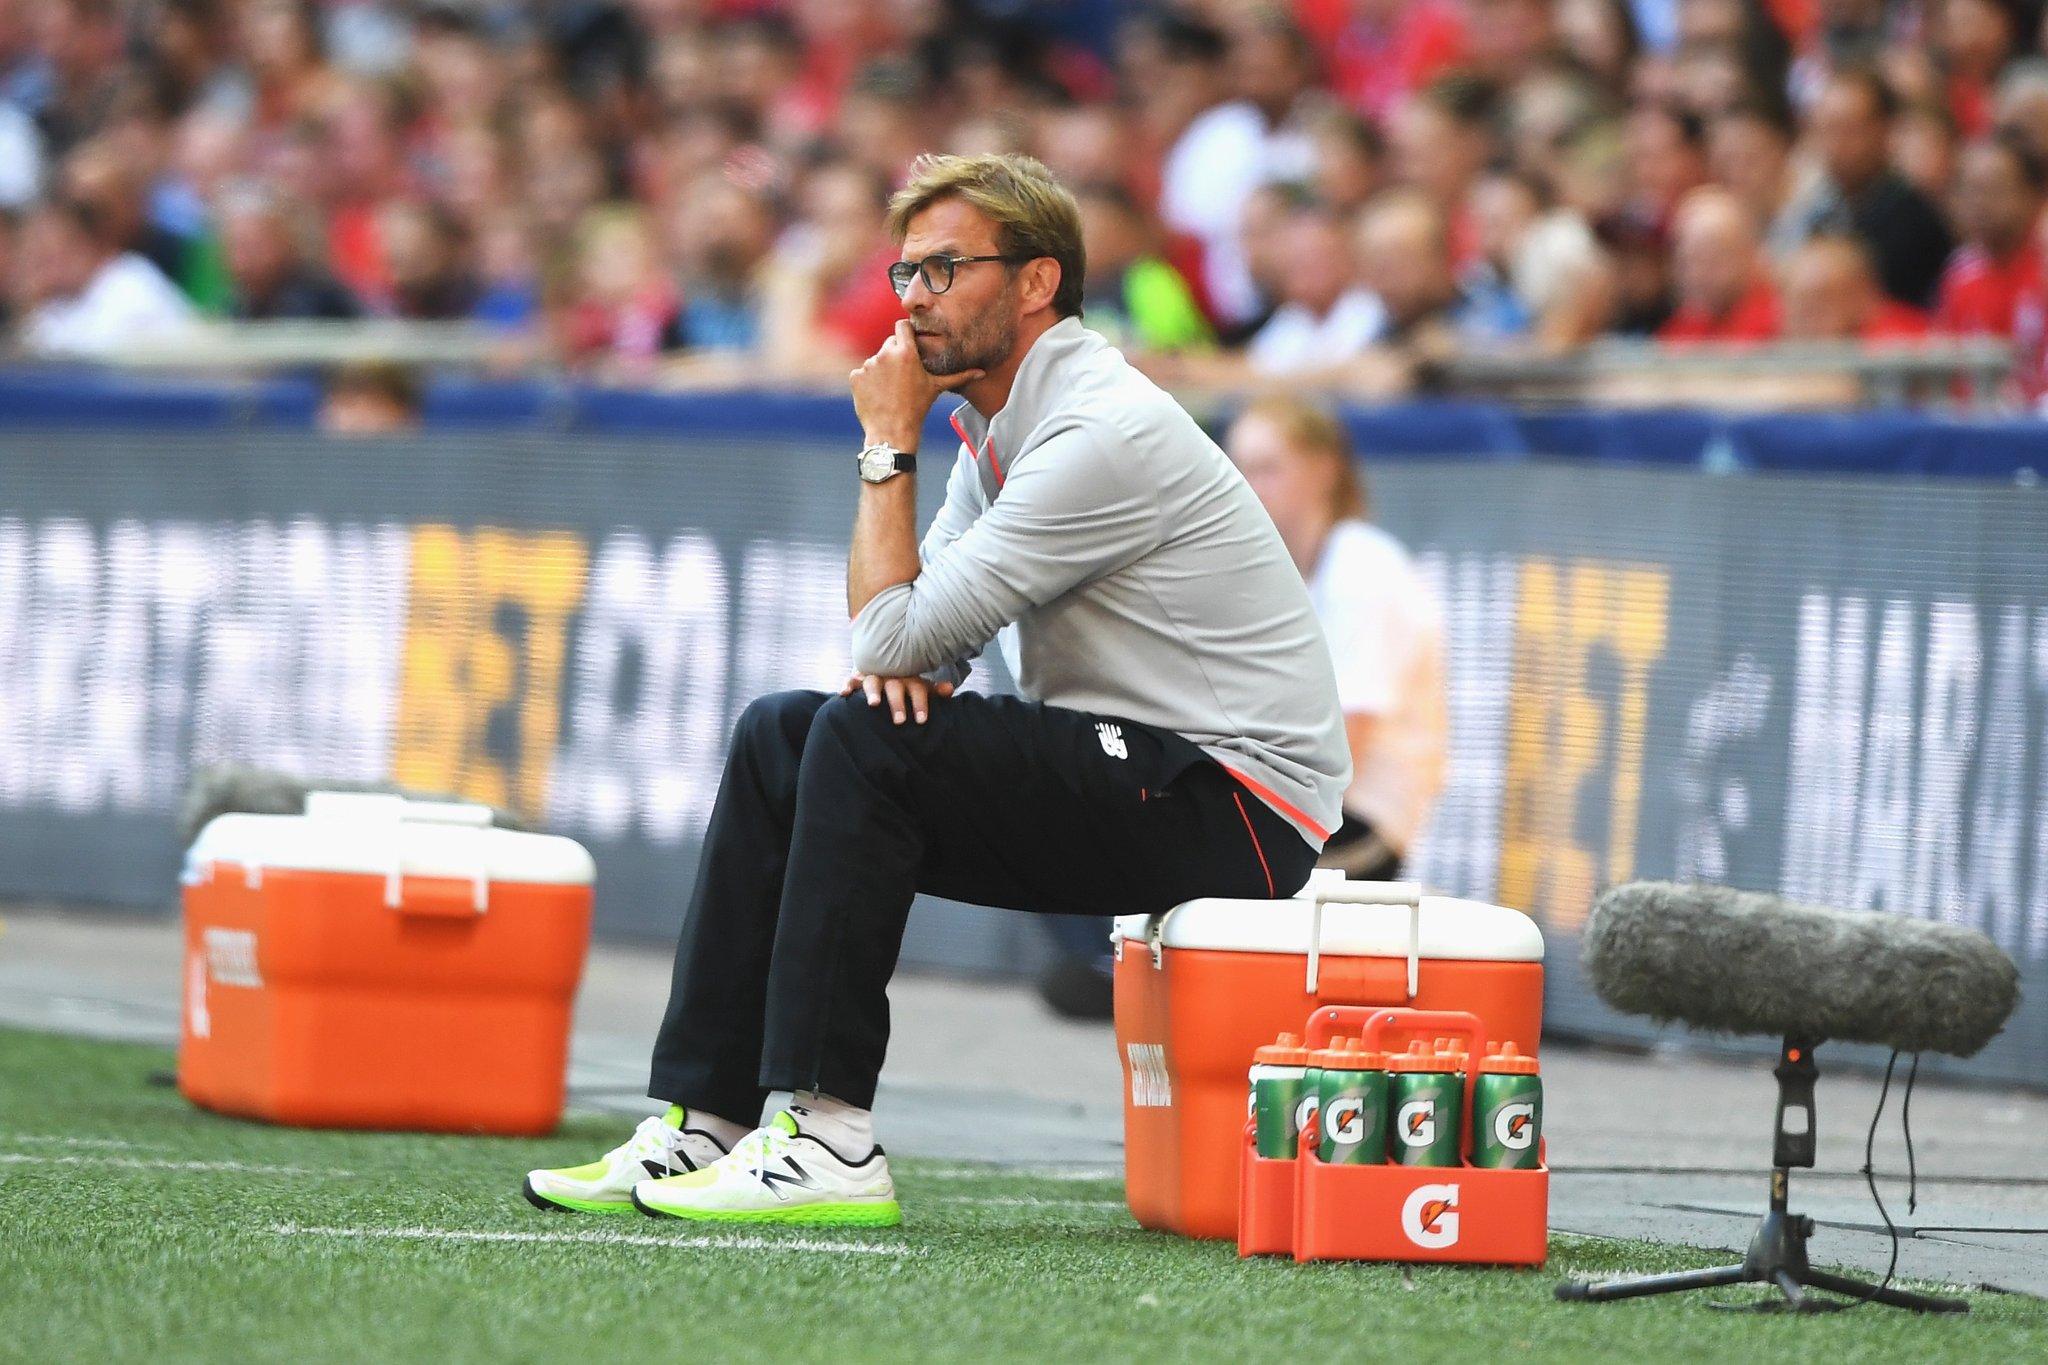 “A real Klopp goal” – Liverpool fans react with delight after Mane opener